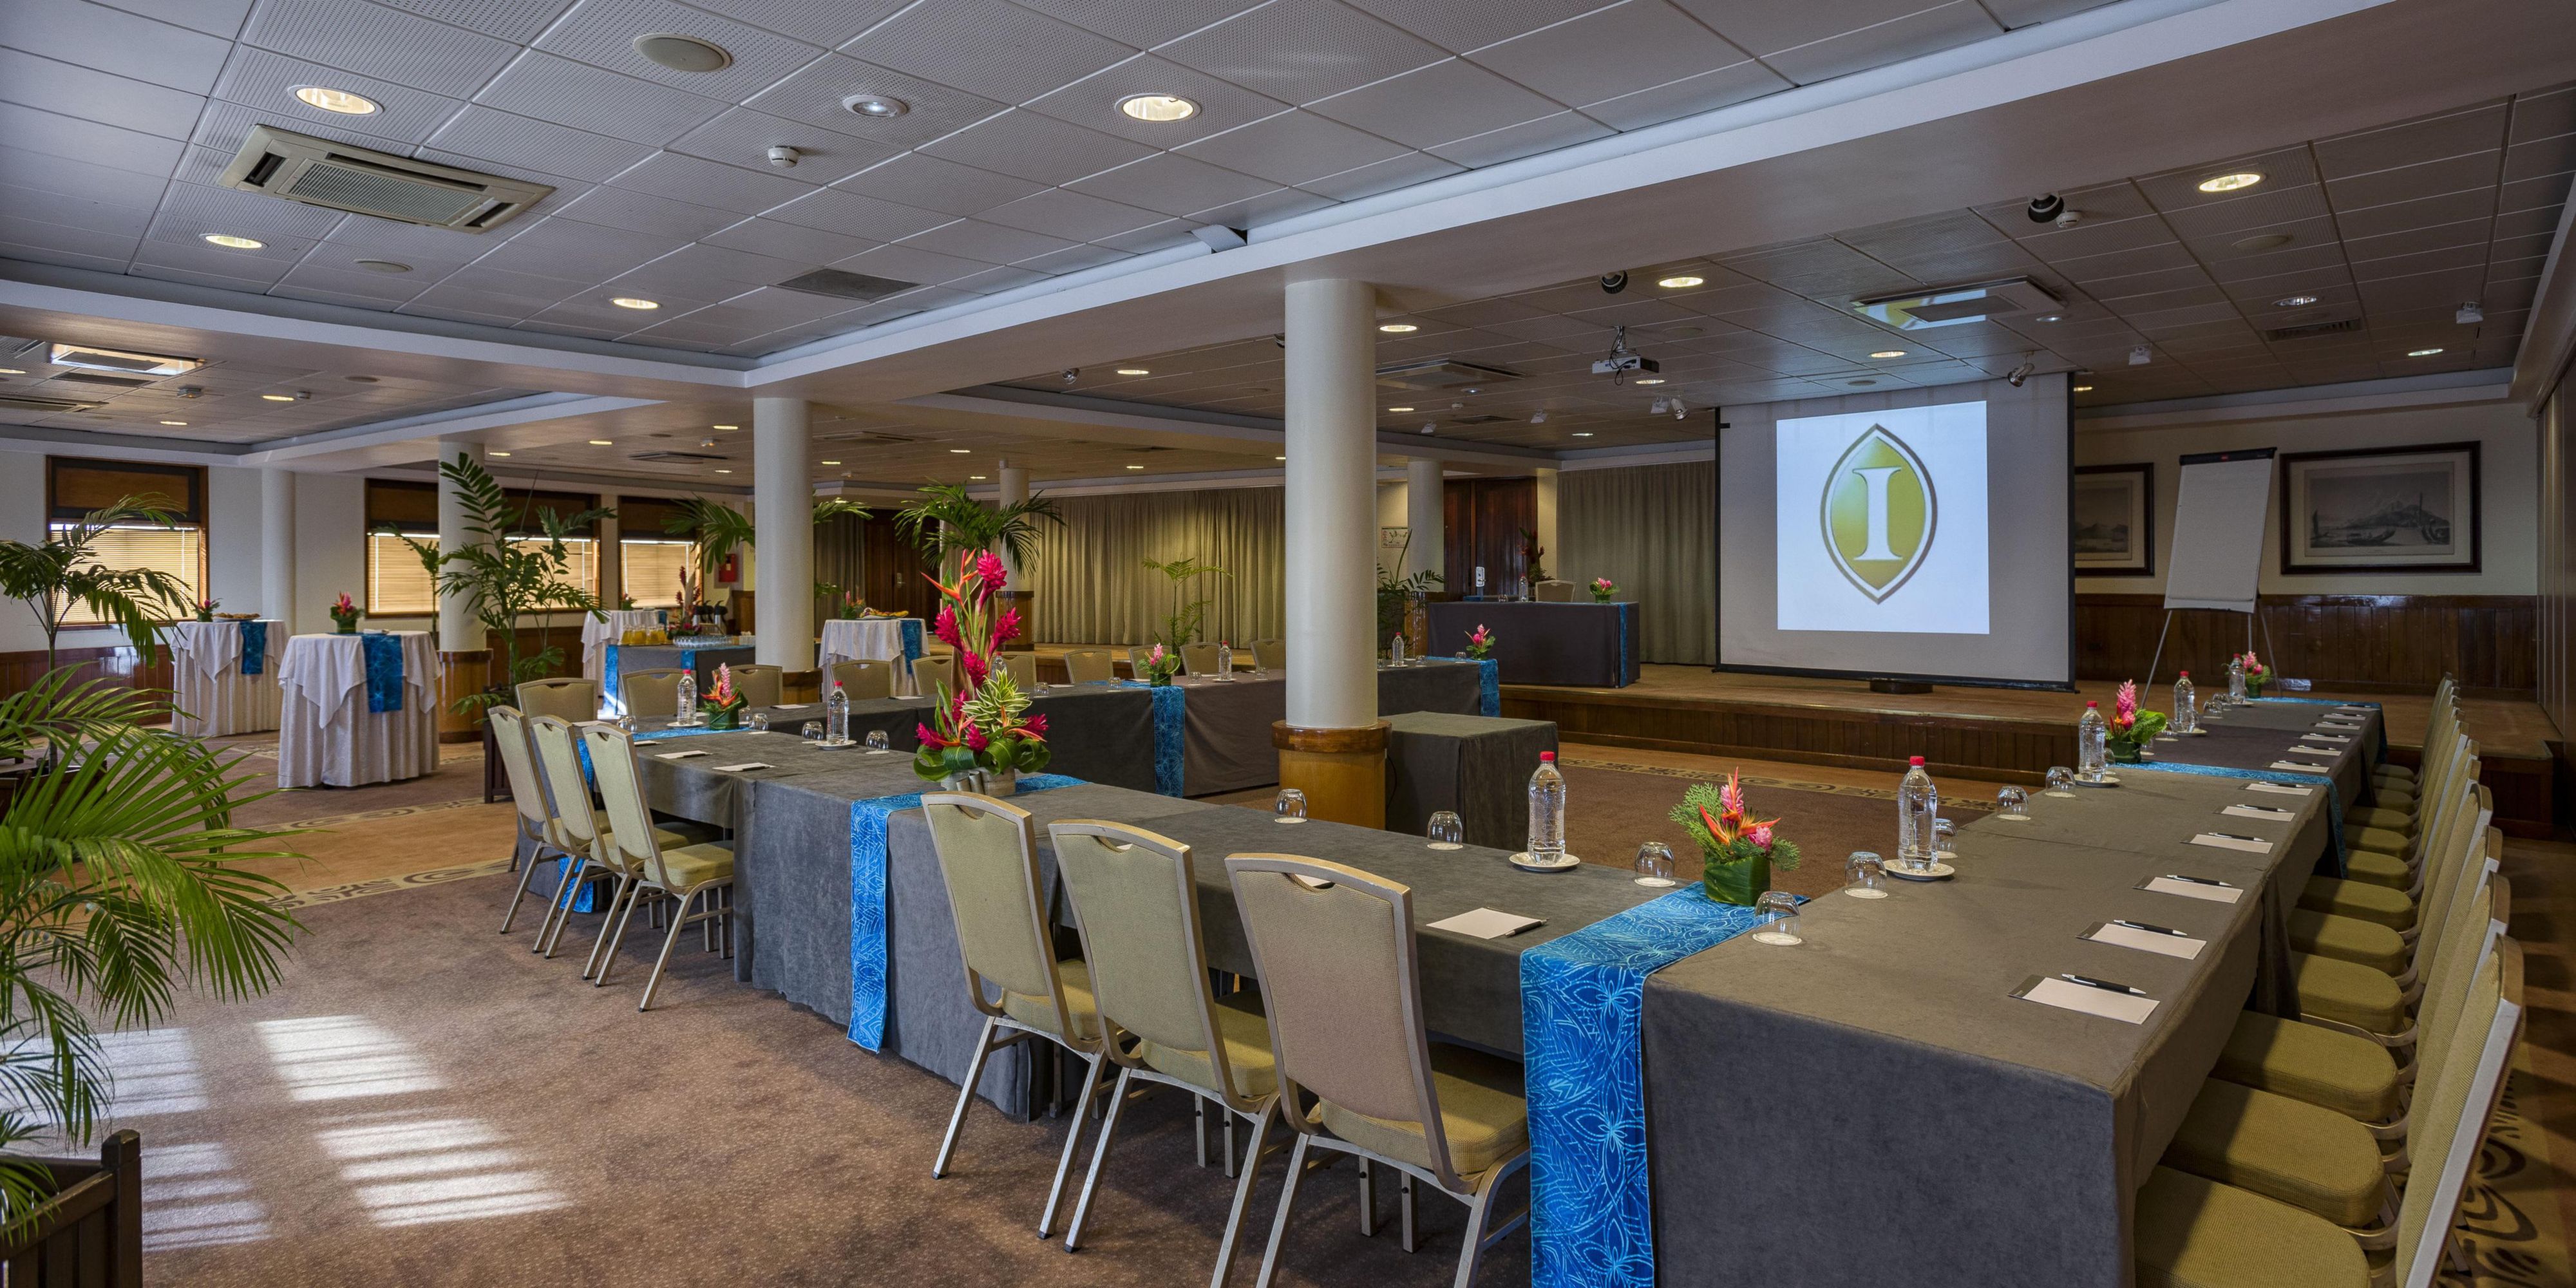 The InterContinental Tahiti Resort and Spa offers a host of fully serviced meetings as well as indoor and outdoor function rooms, flexible enough to host large meetings, wedding receptions, parties, conference and more.